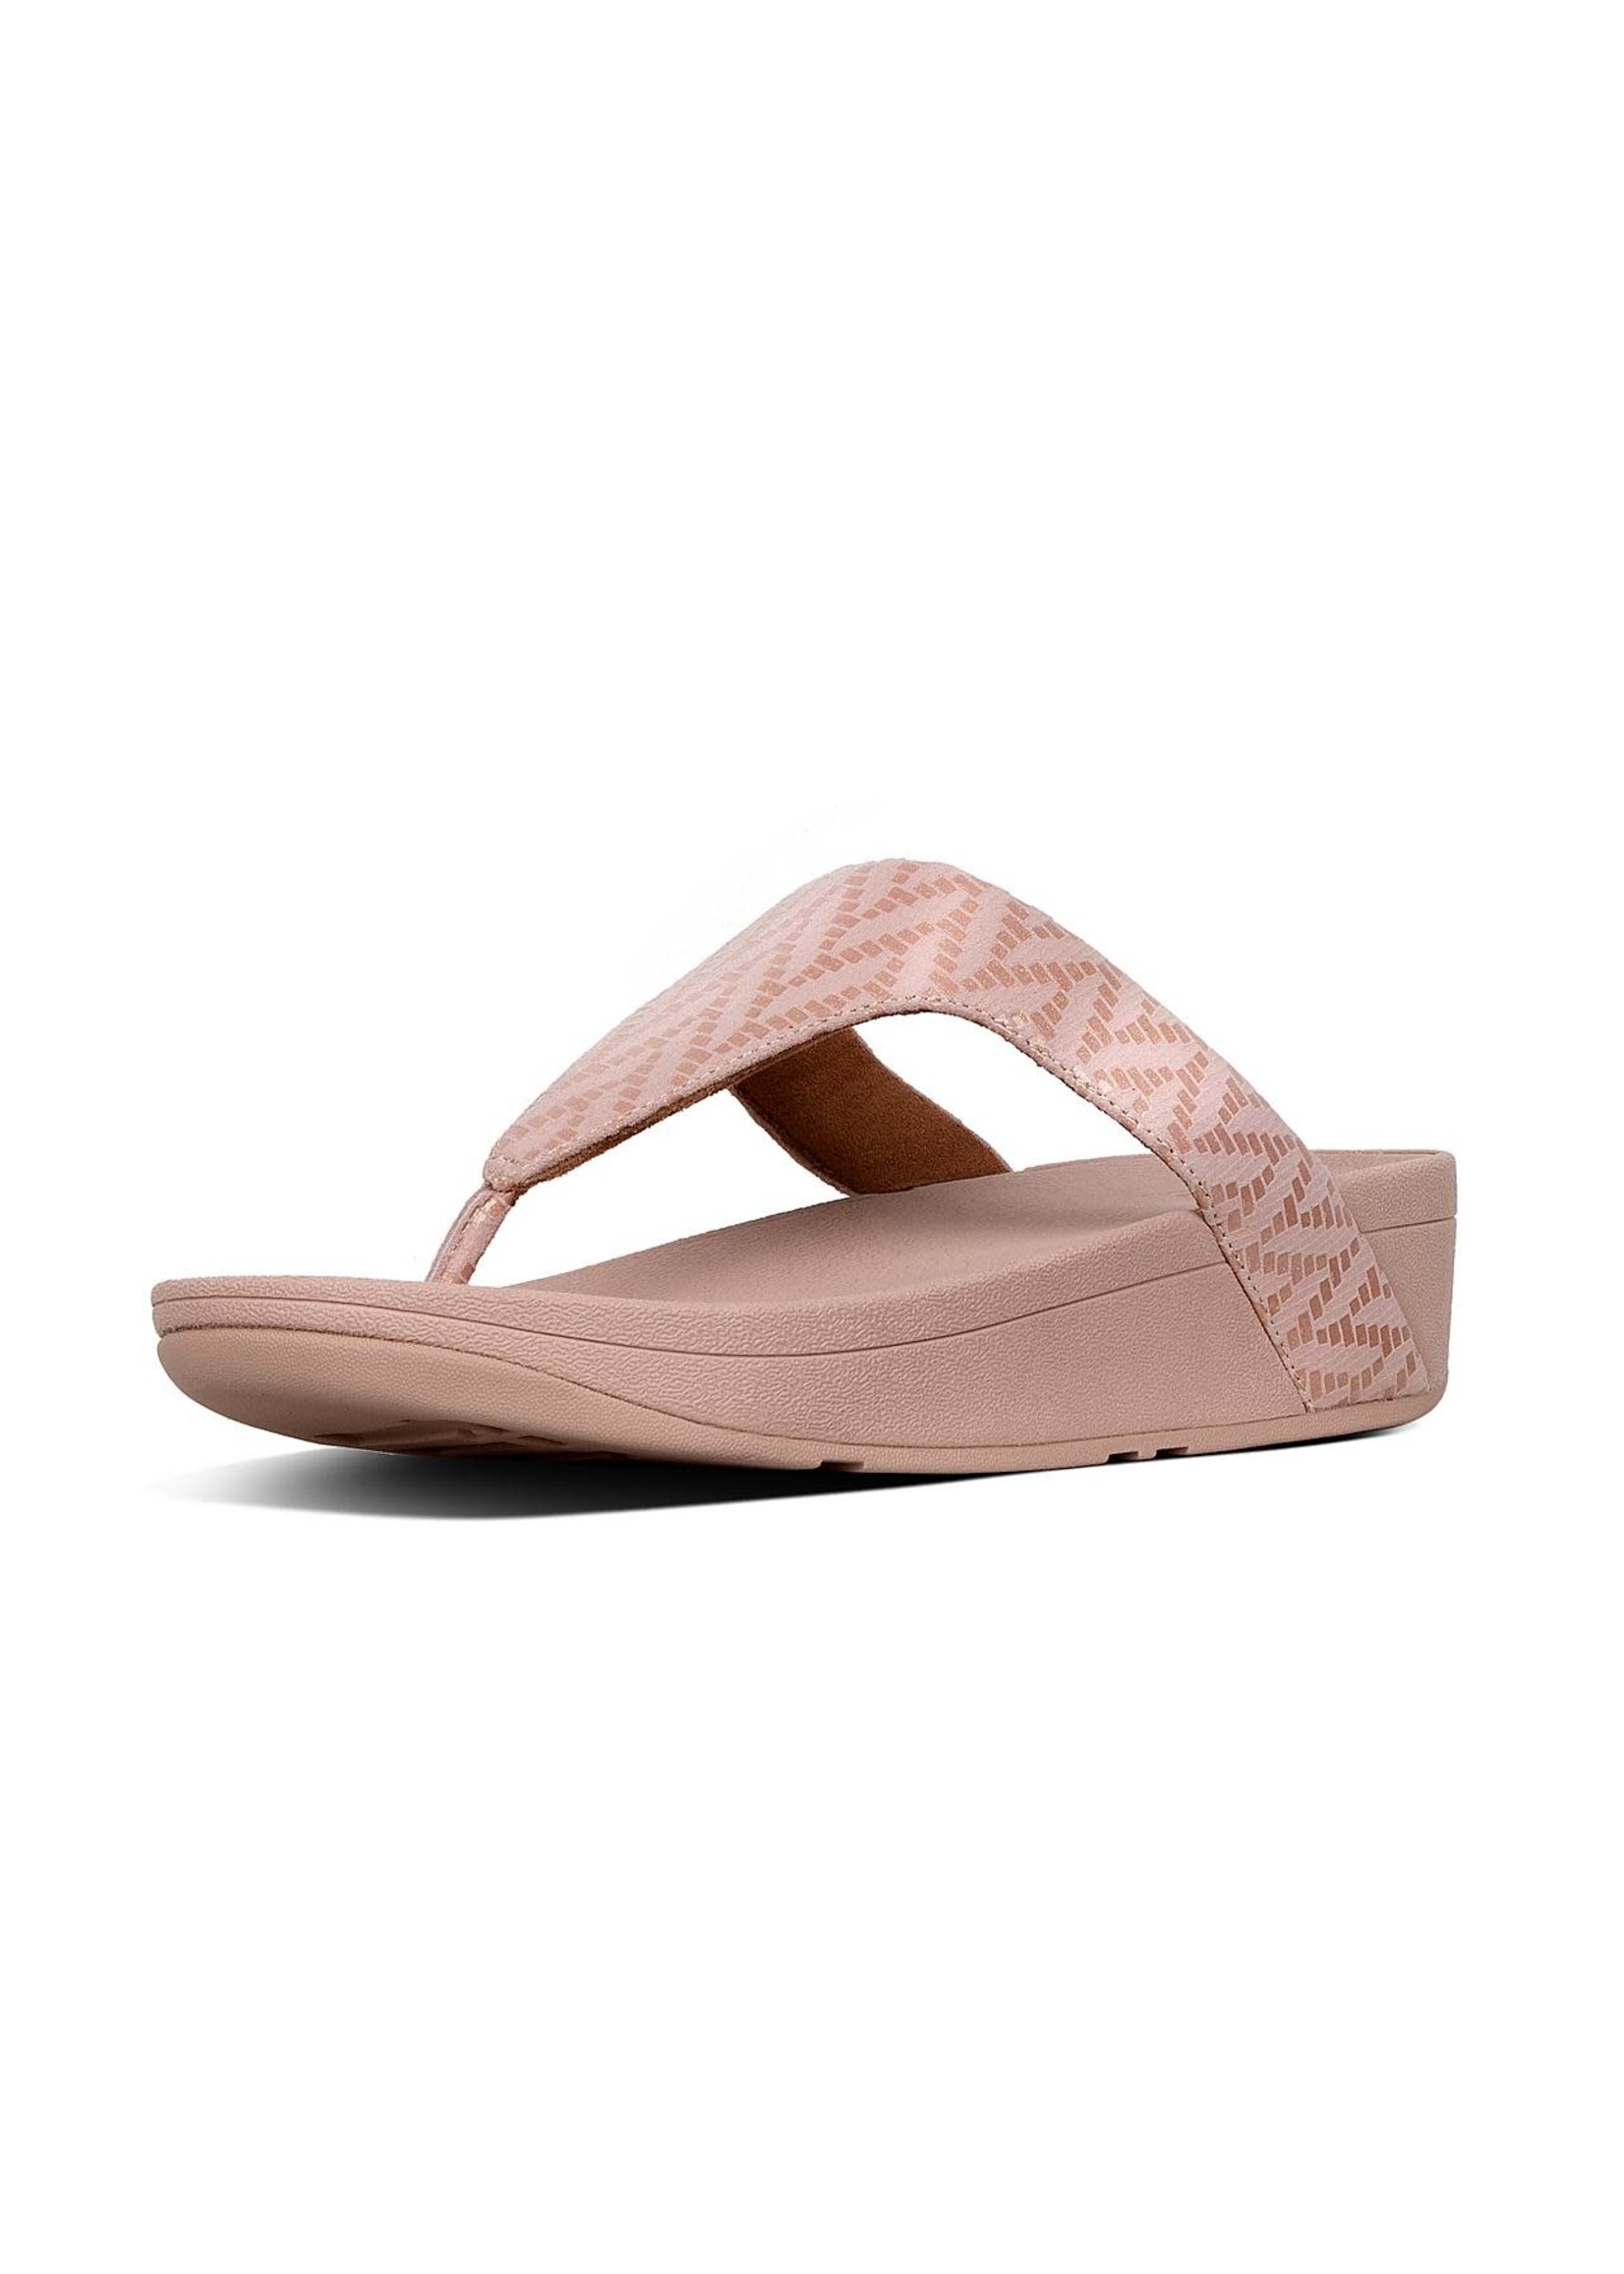 FIT FLOP FIT FLOP- LOTTIE CHEVRON TOE THONG- OYSTER PINK